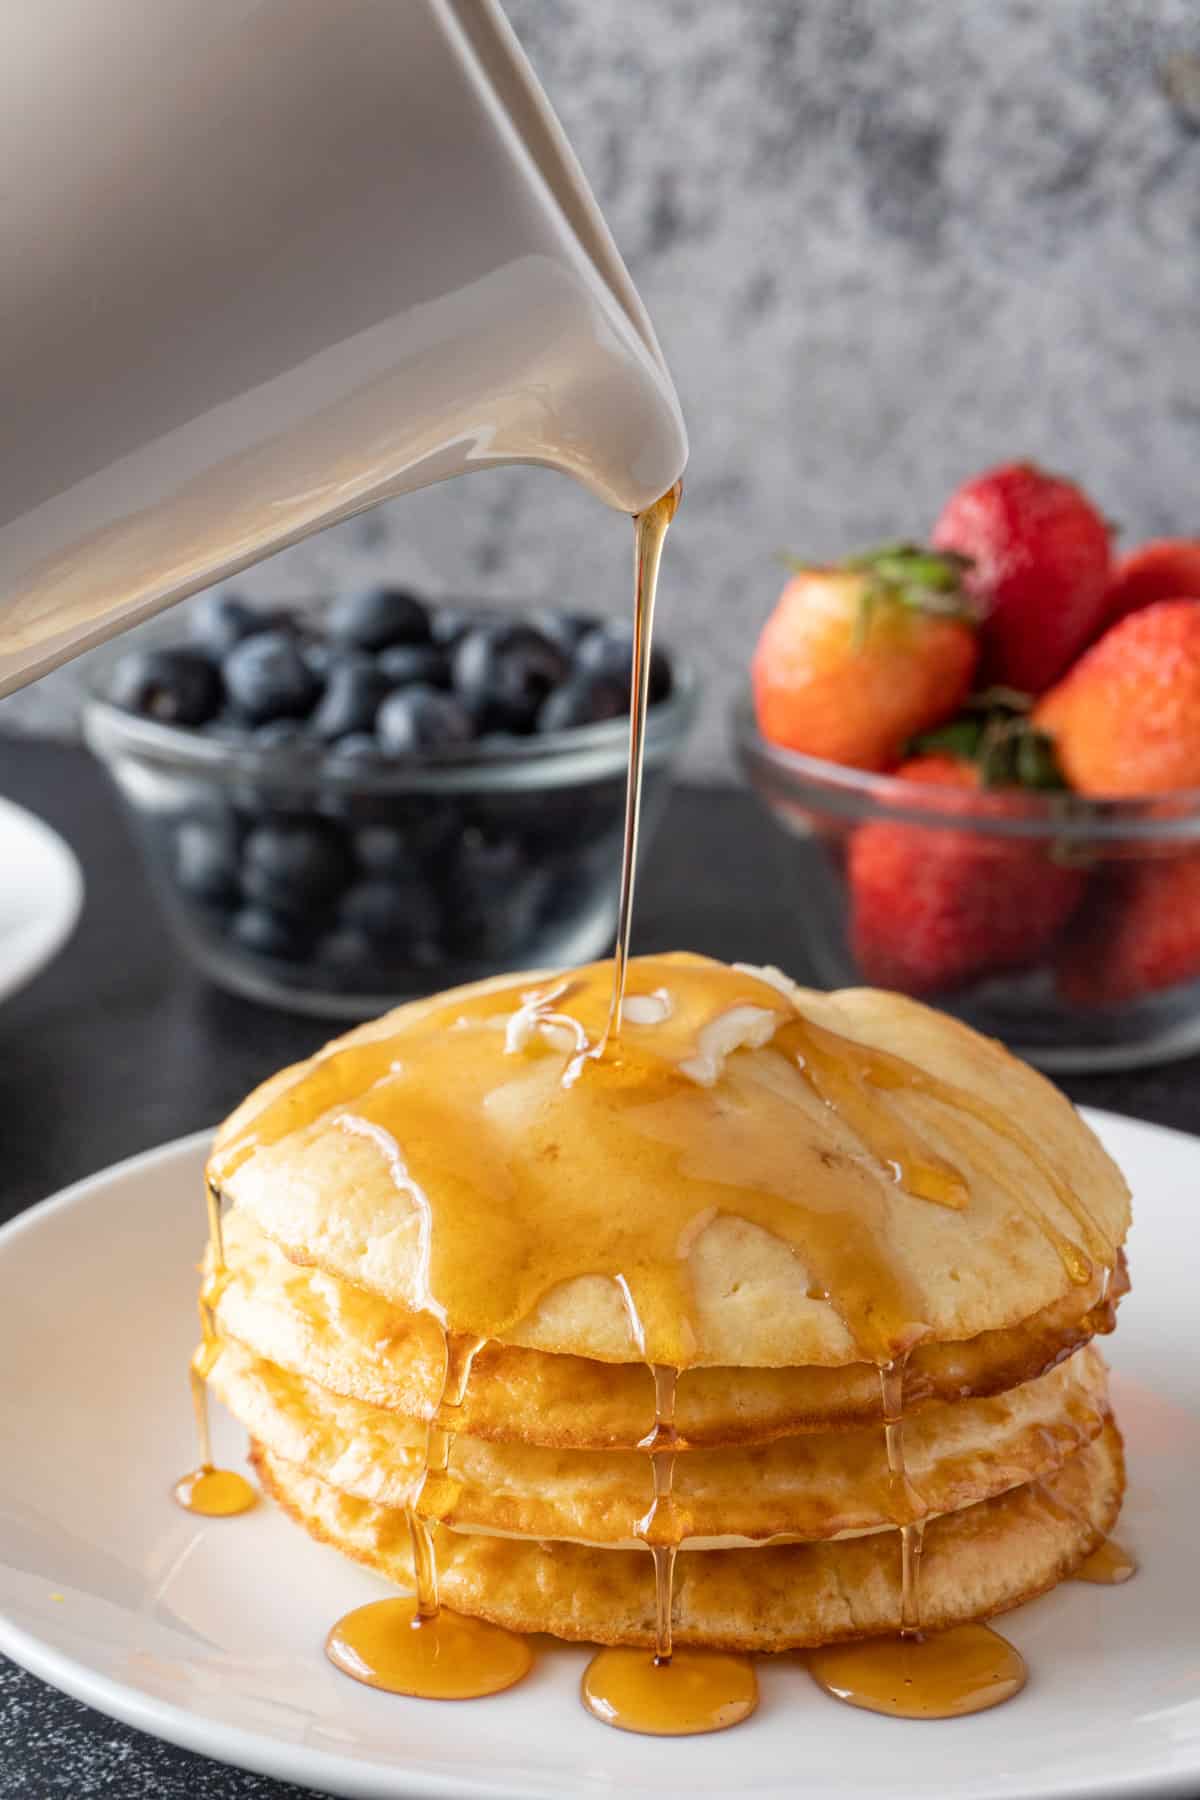 pouring syrup over pancakes.